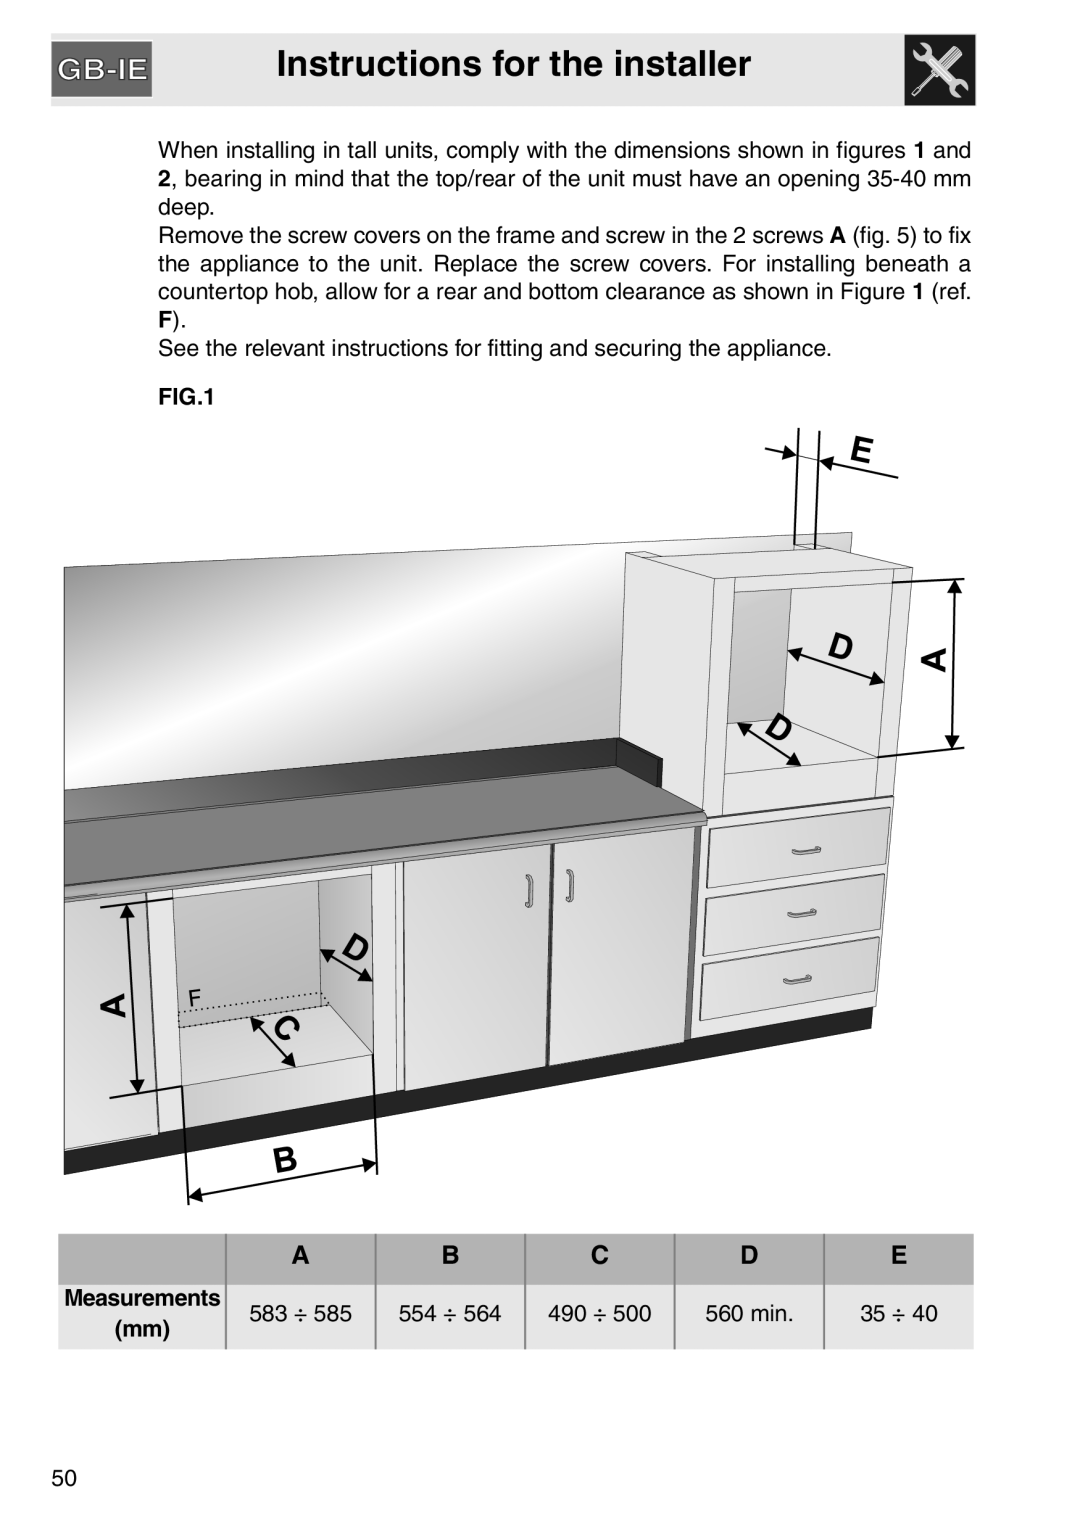 Smeg SA561X-9 installation instructions Instructions for the installer, Measurements mm 